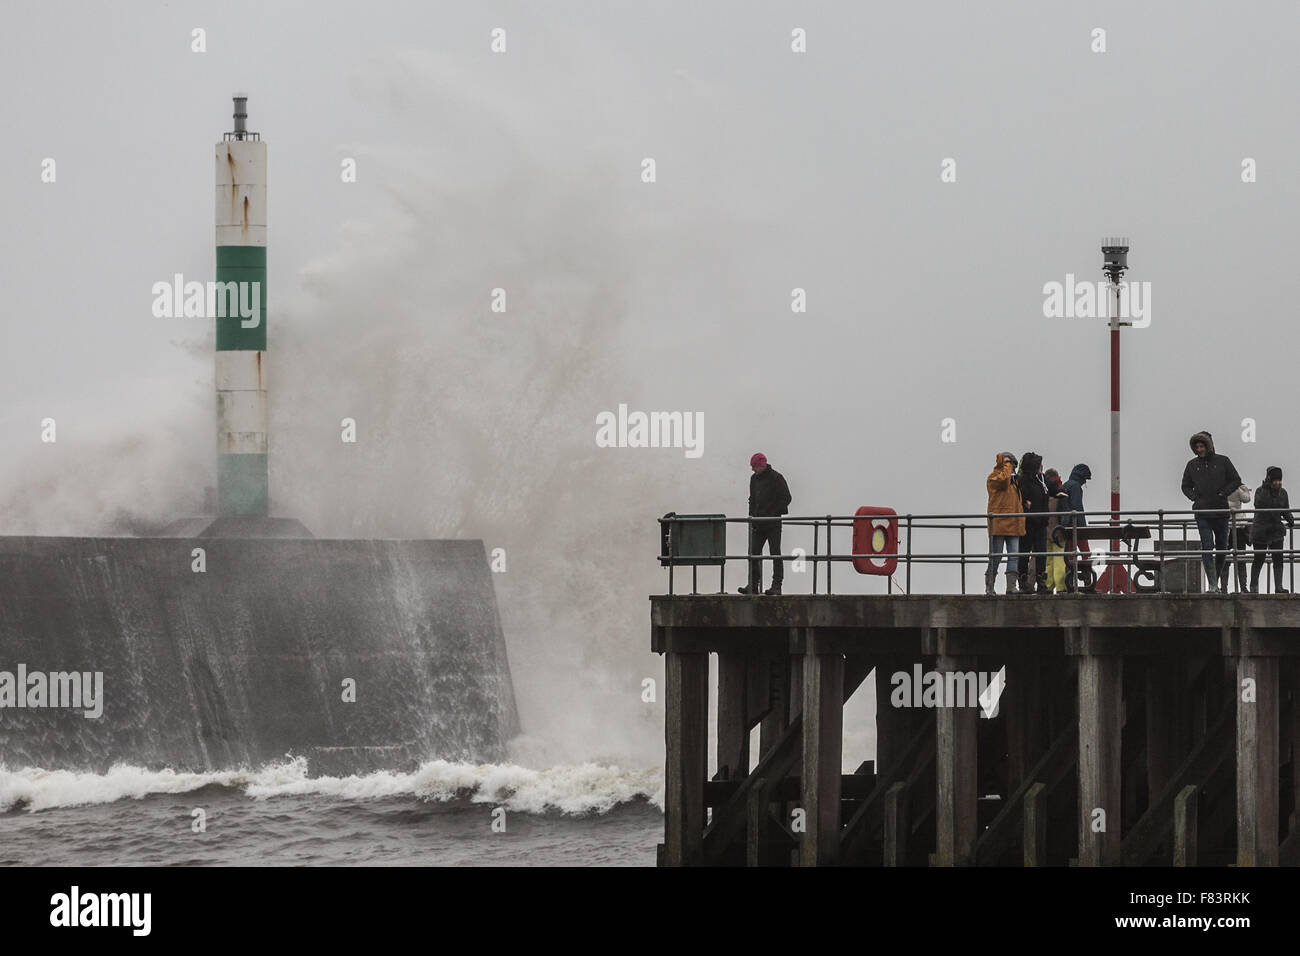 Wales, UK. 05th December 2015 Storm Desmond, the 4th named recent storms brings gale force winds and rough seas to Aberystwyth, battering the jetty near the harbour entrance as pedestrians stand watching on the west coast of Wales. Credit:  Ian Jones/Alamy Live News Stock Photo